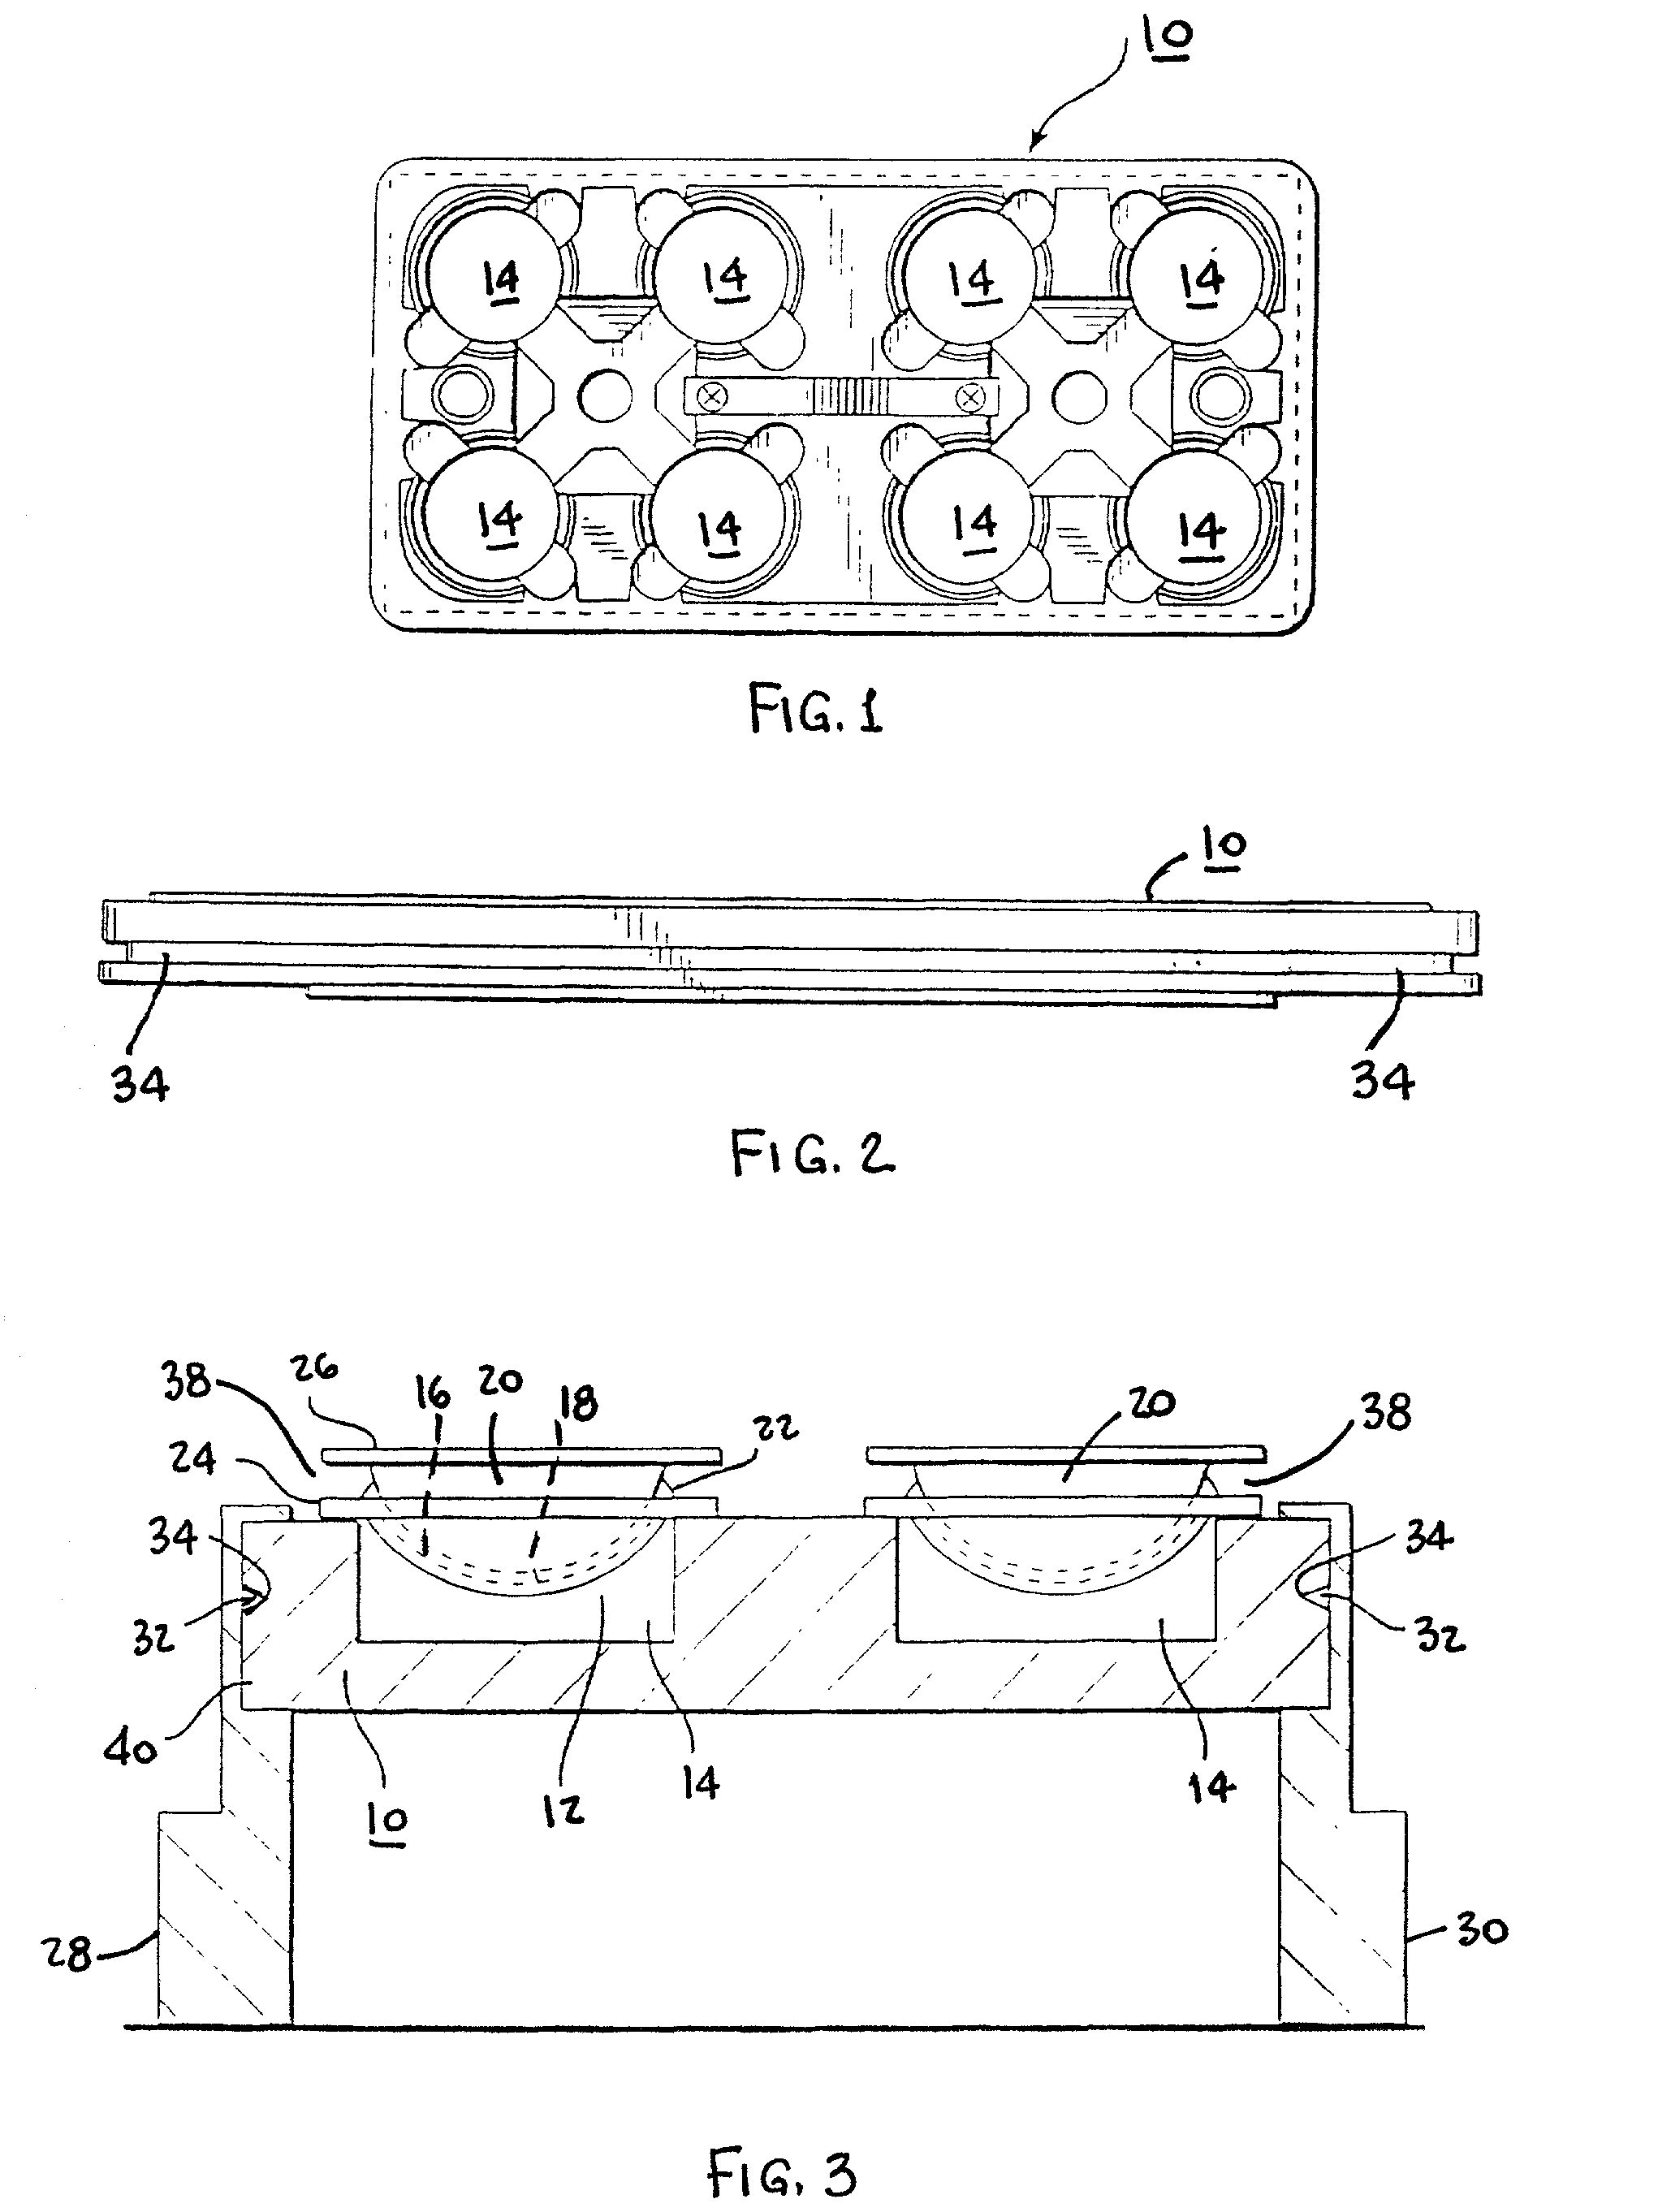 Silicon carbide IR-emitter heating device and method for demolding lenses